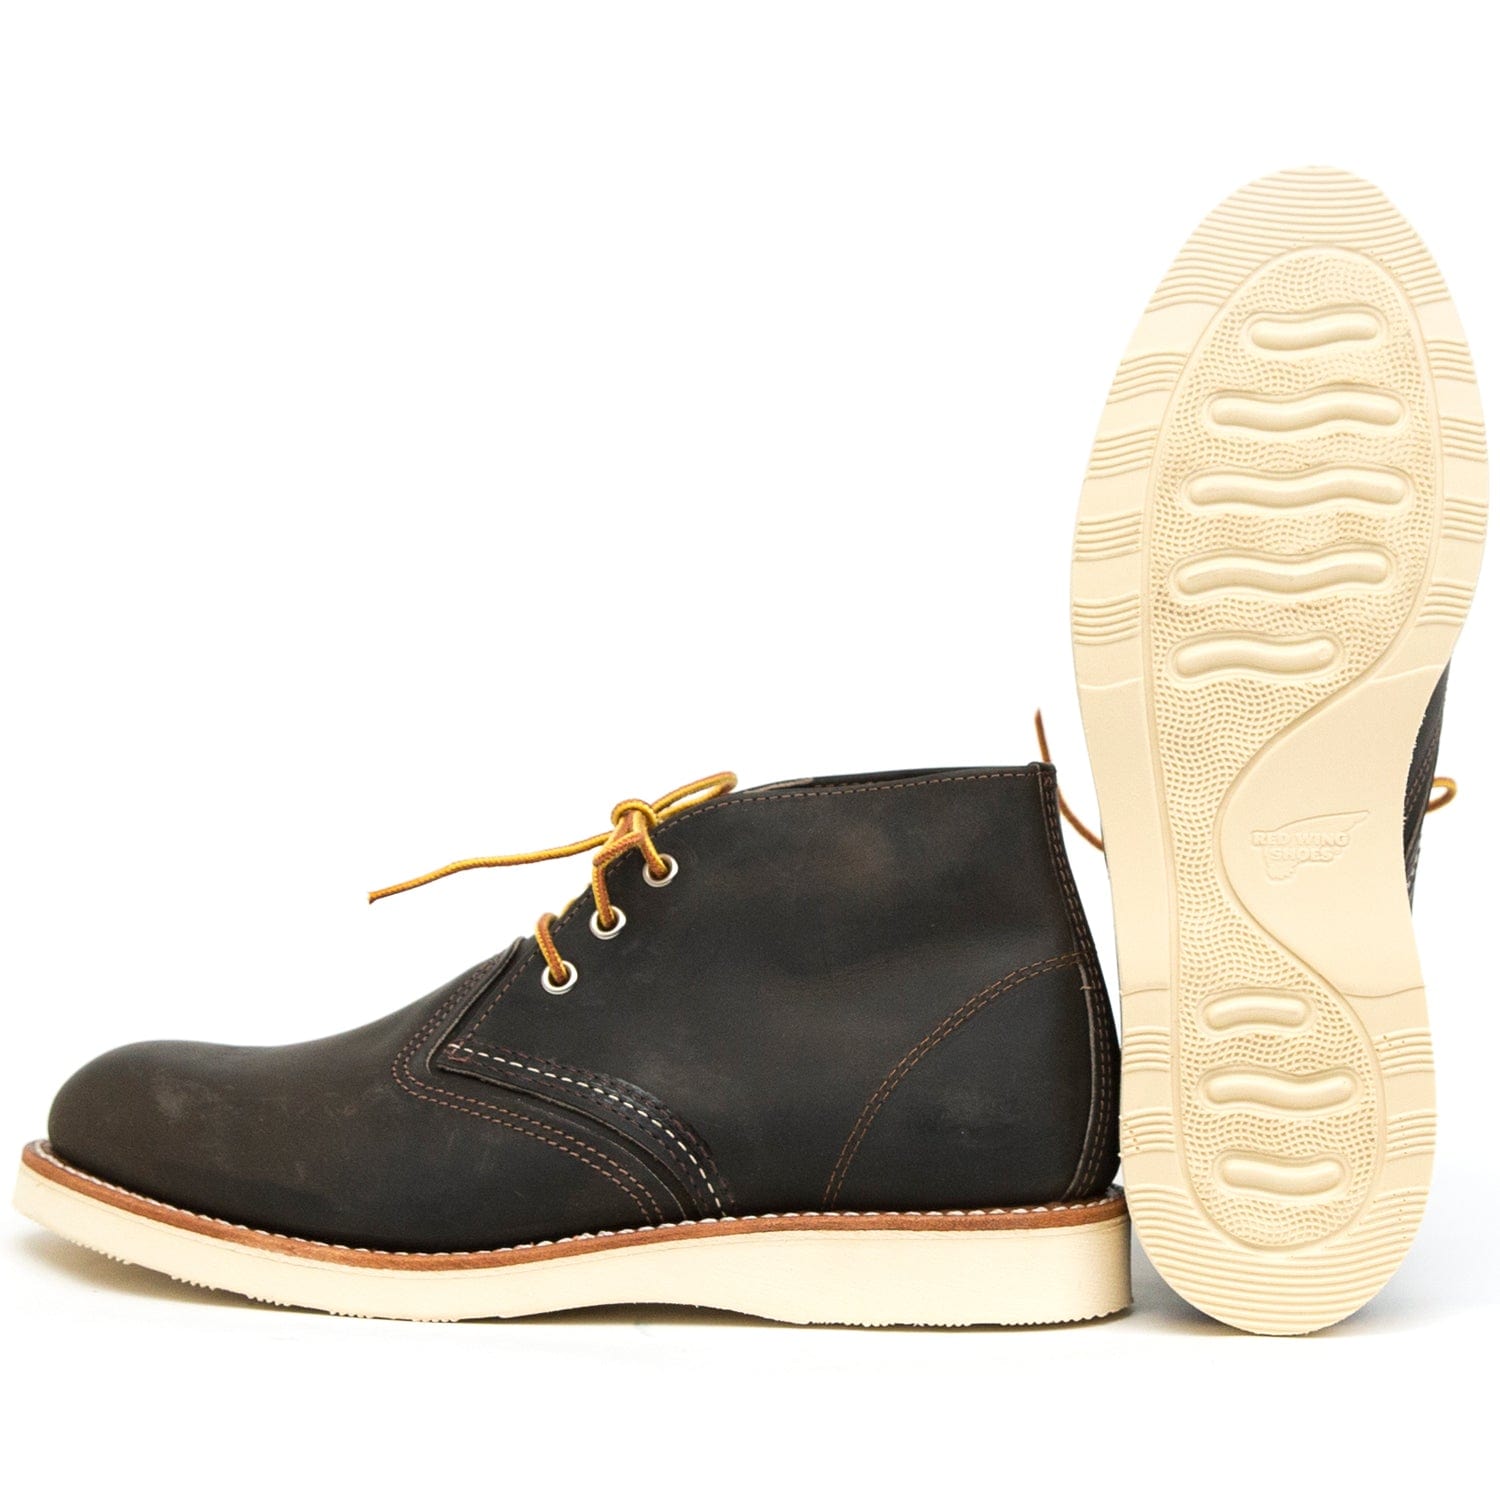 3150 Work Chukka Charcoal Rough & Tough – Red Wing